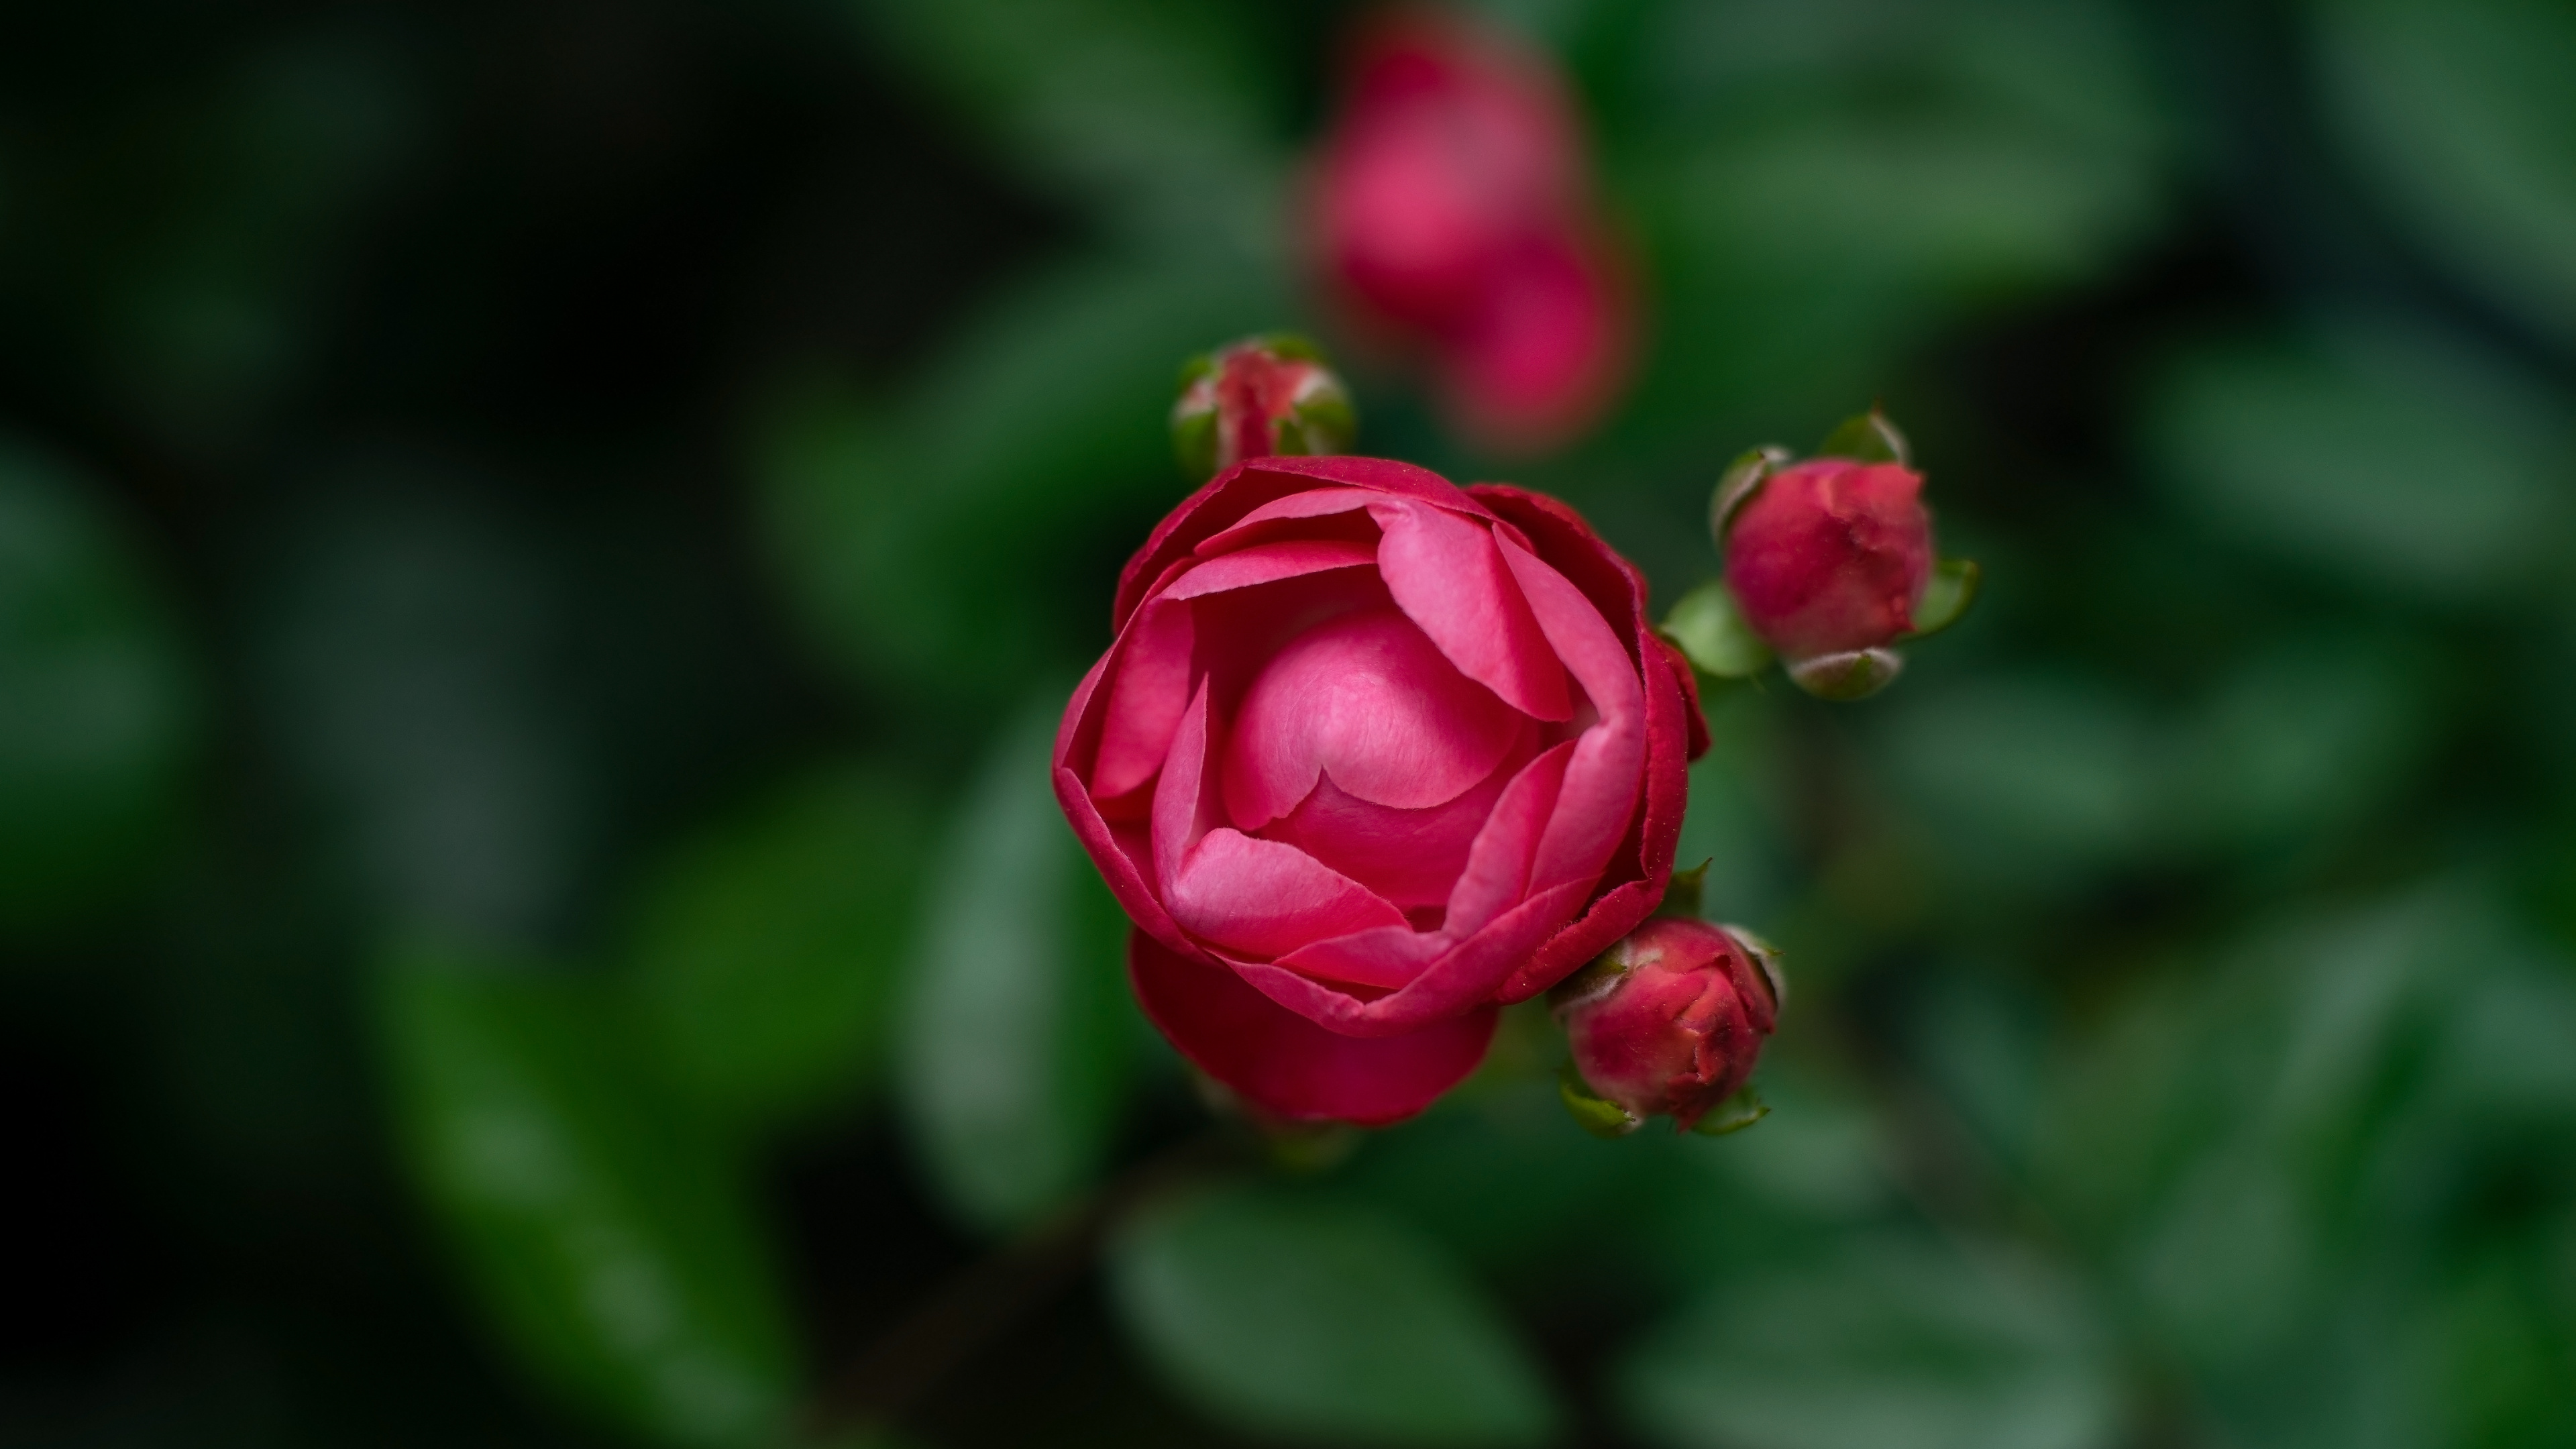 Pink Rose in Bloom During Daytime. Wallpaper in 3840x2160 Resolution